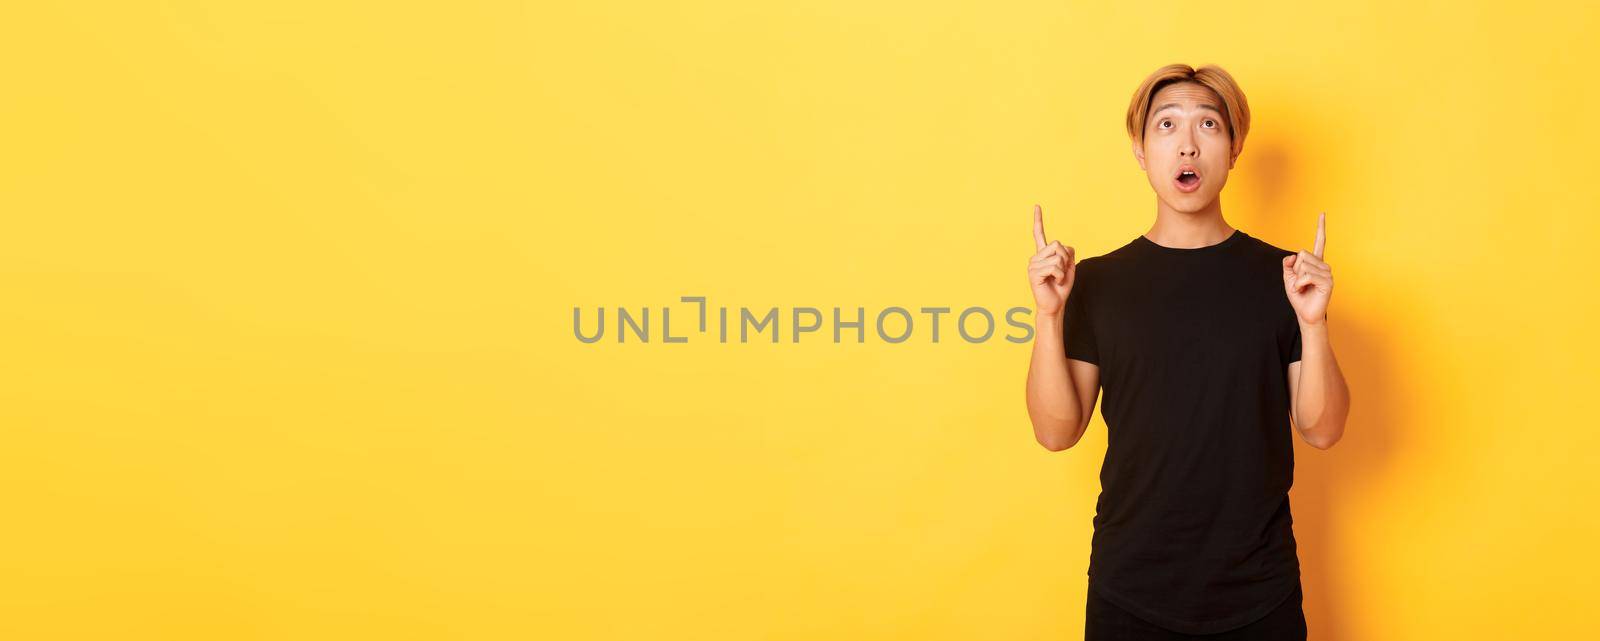 Portrait of curious and amazed asian guy with blond hair, wearing black t-shirt, looking and pointing fingers up astonished, yellow background.